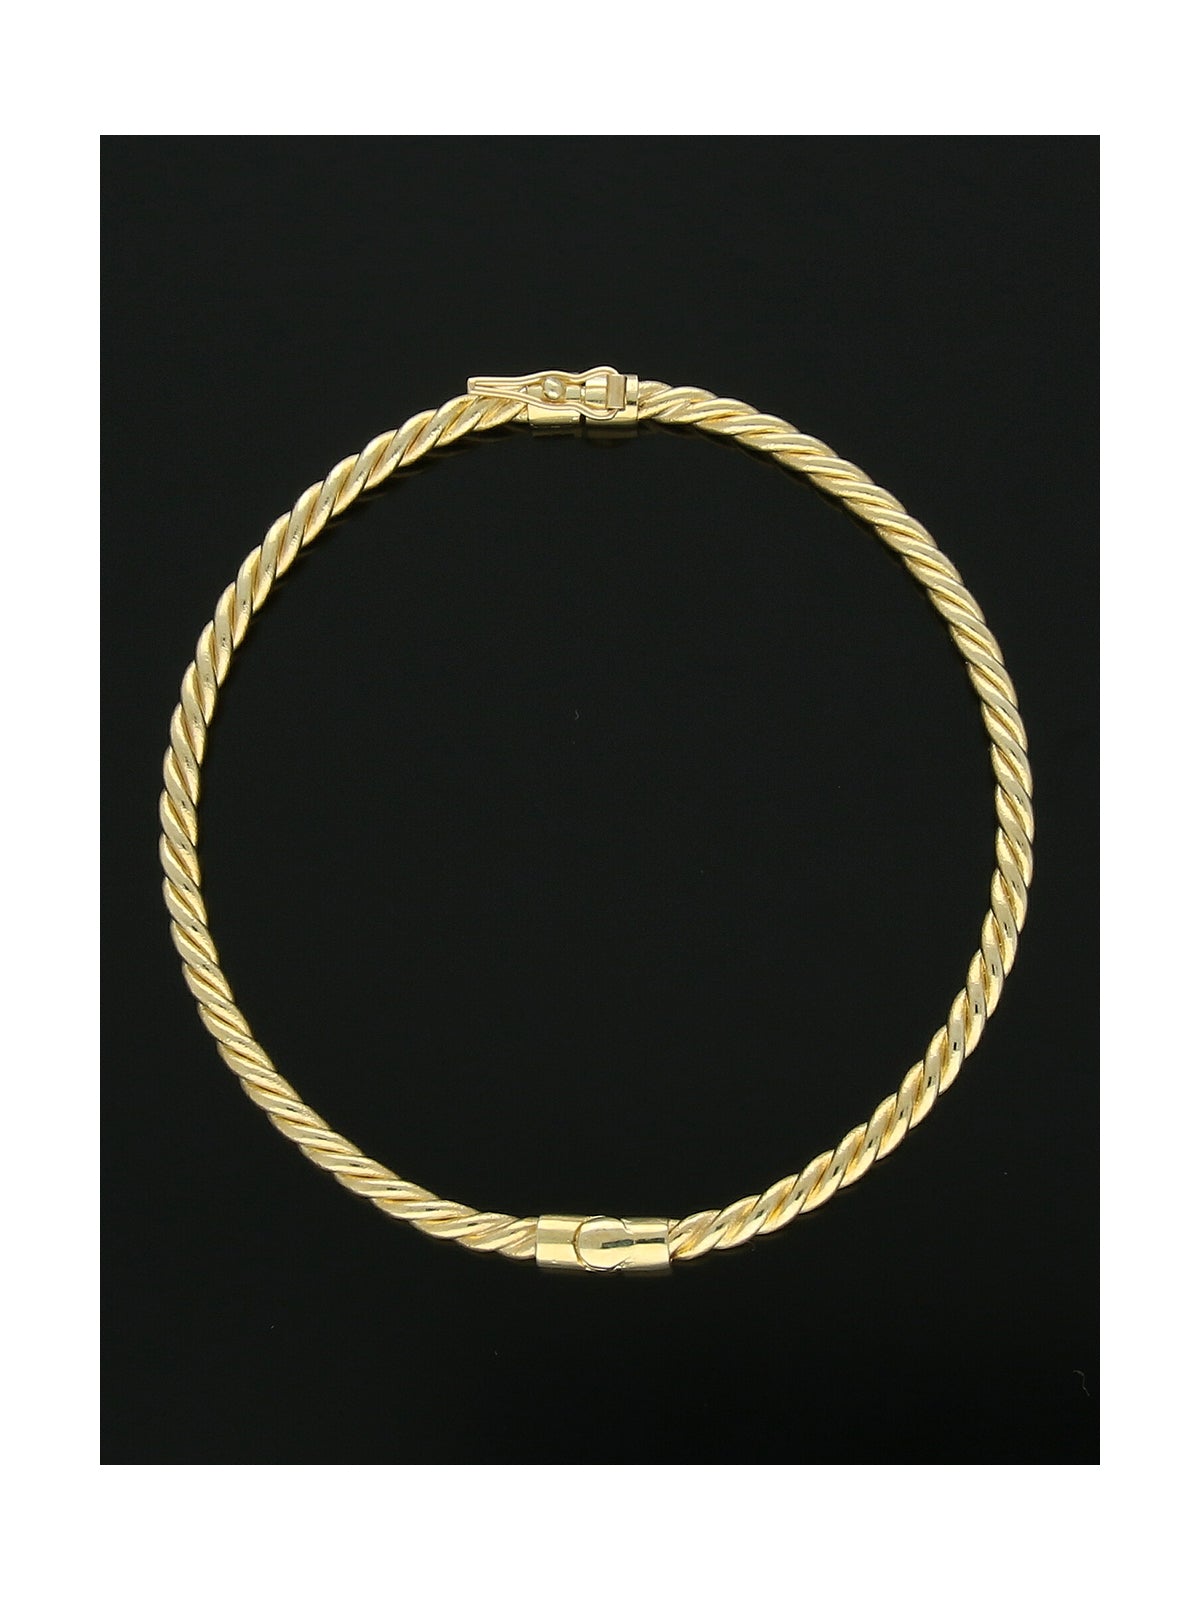 Twisted Hinged Bangle in 9ct Yellow Gold